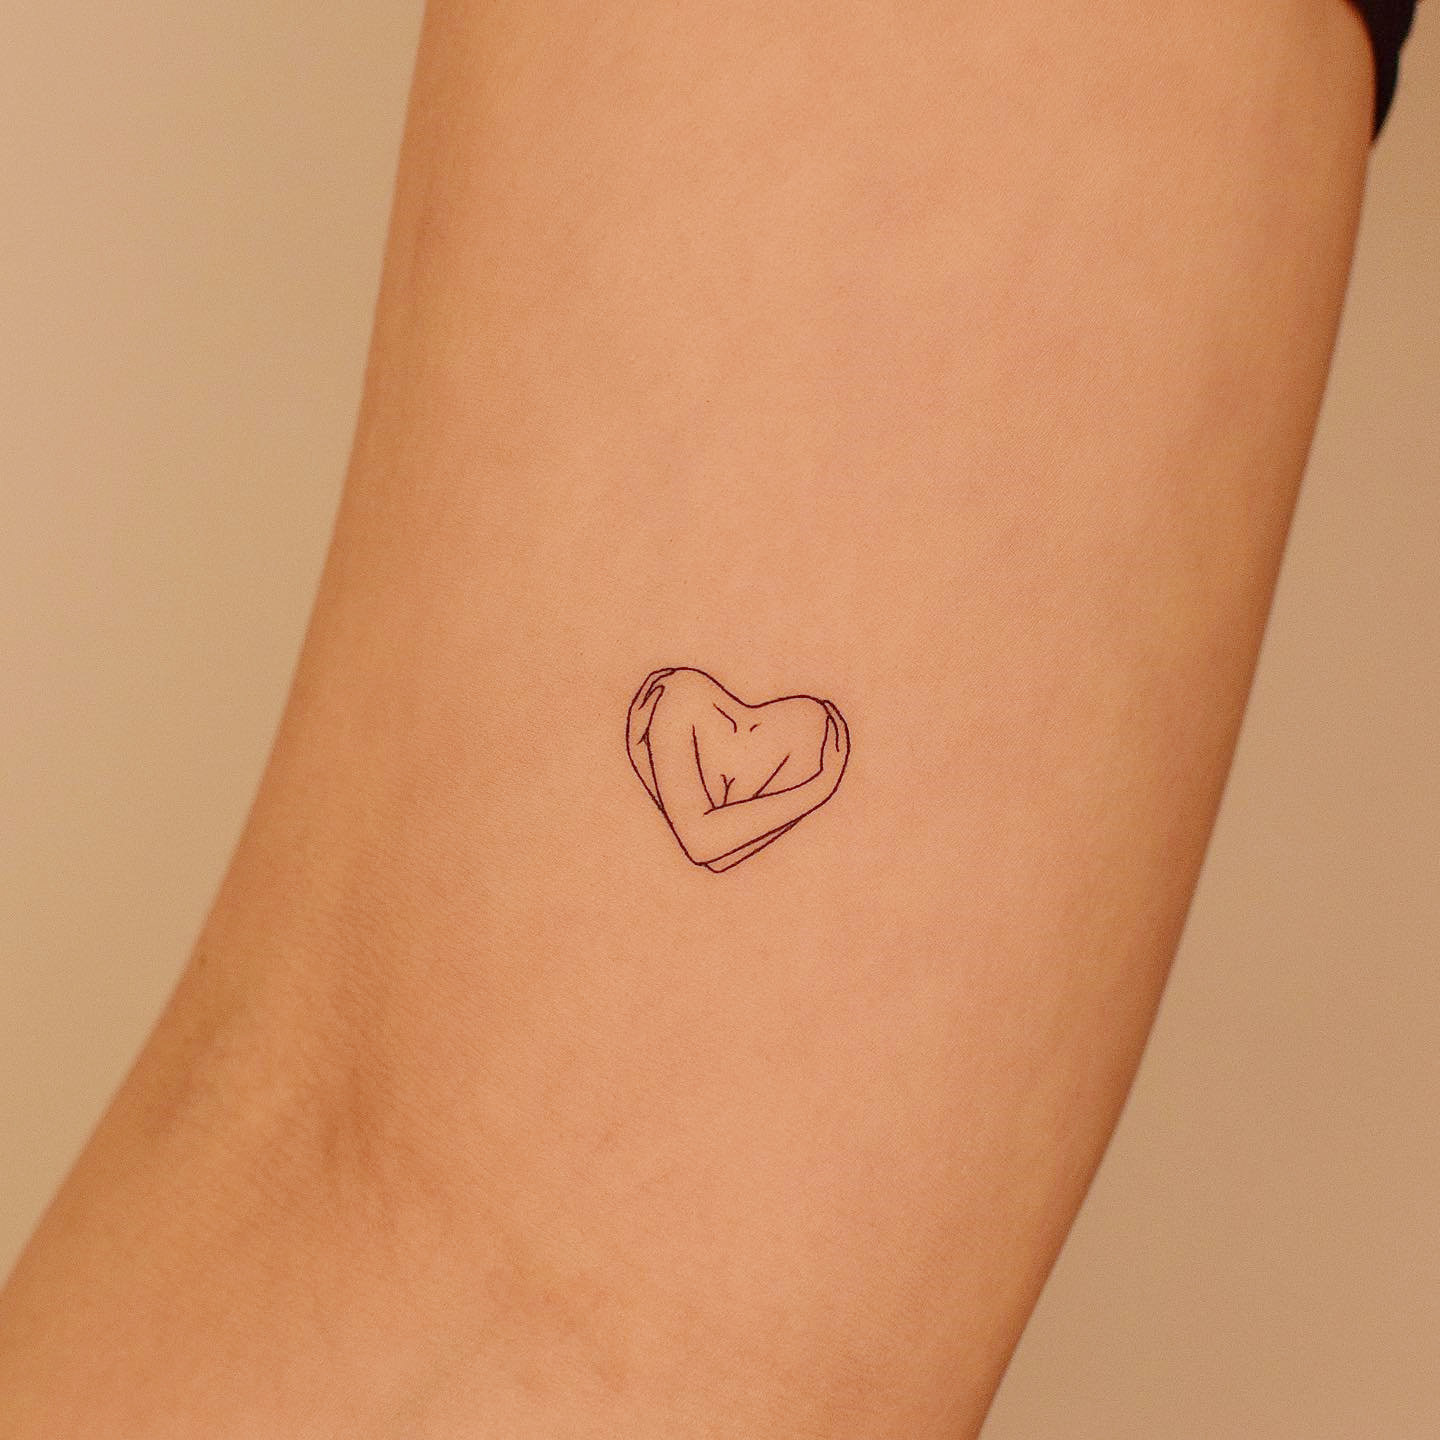 35 Small Tattoo ideas with Meaning for Women